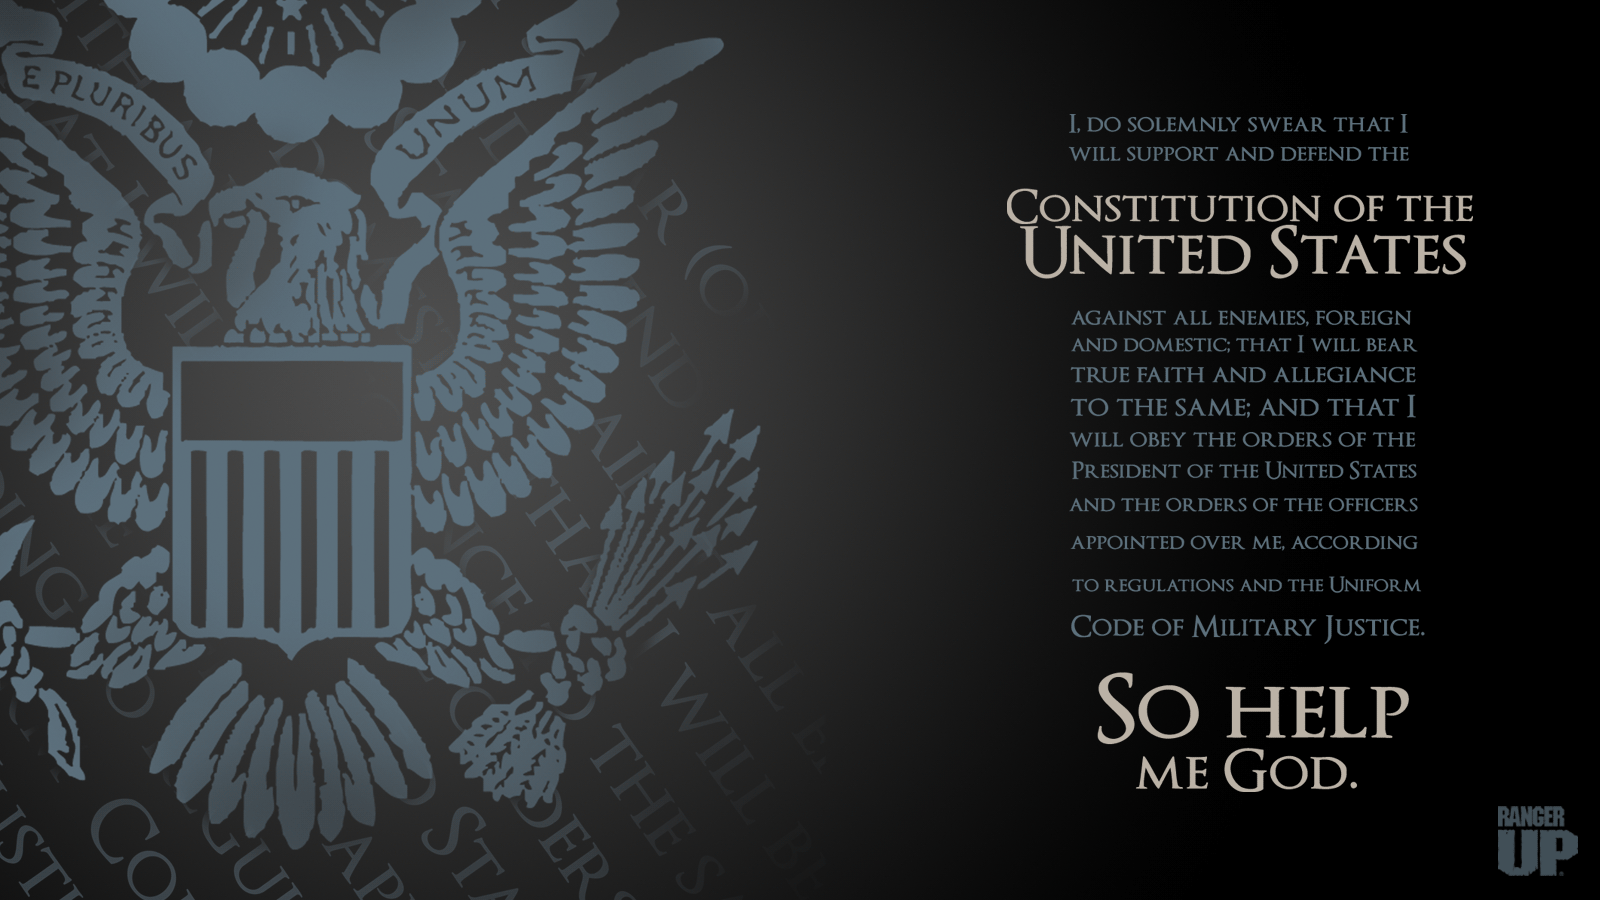  Oath of Enlistment   TheRhinoDen Home Of All Things Military